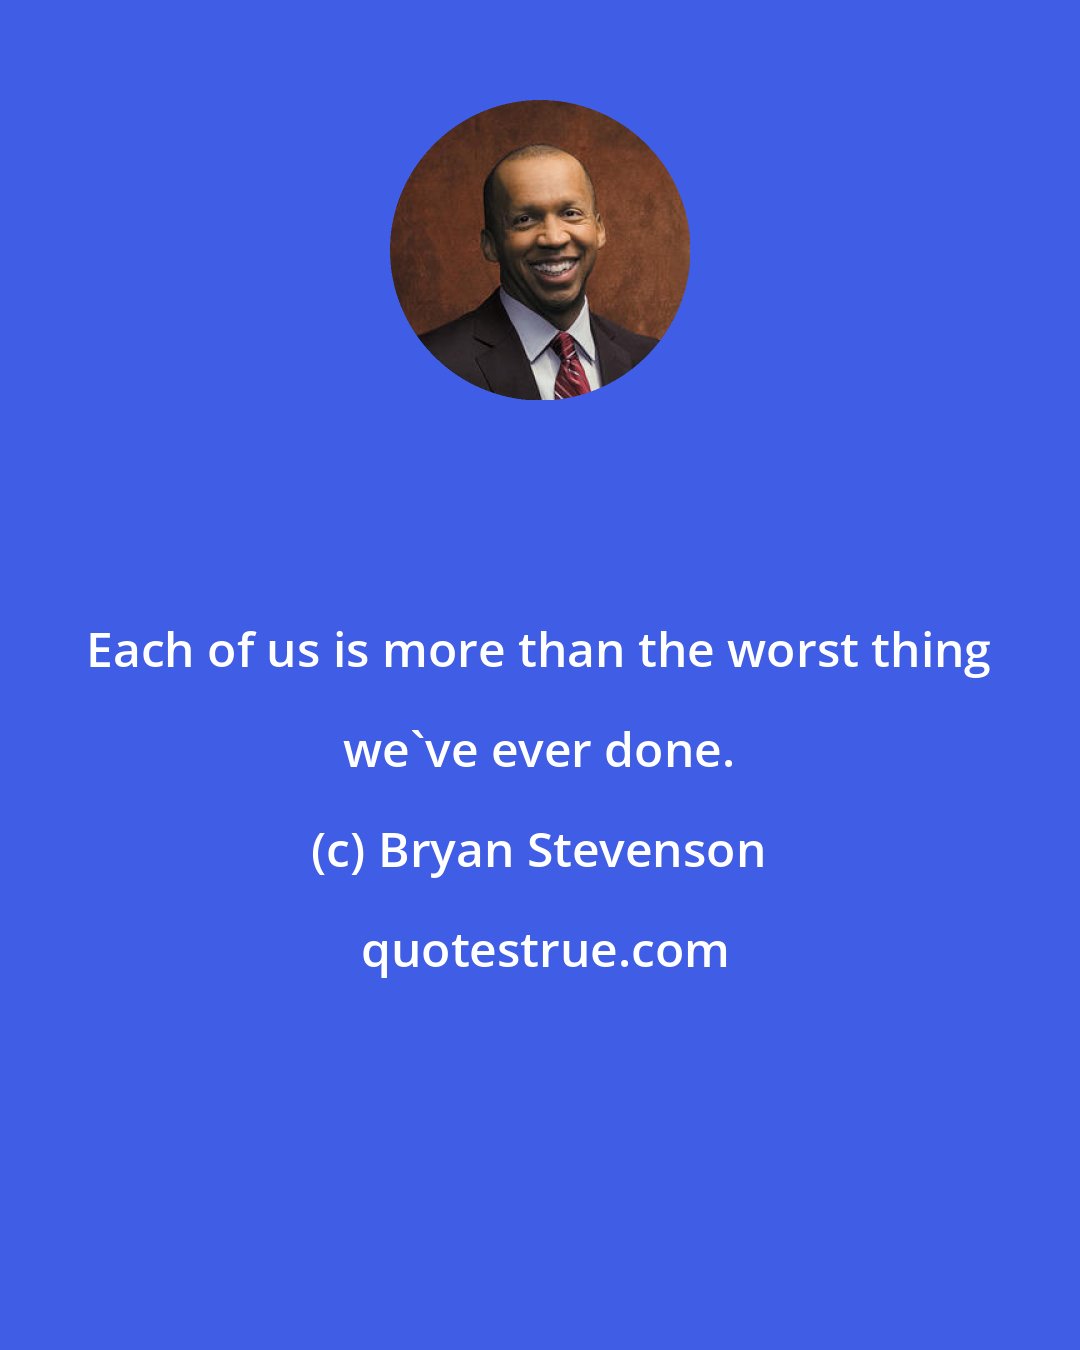 Bryan Stevenson: Each of us is more than the worst thing we've ever done.